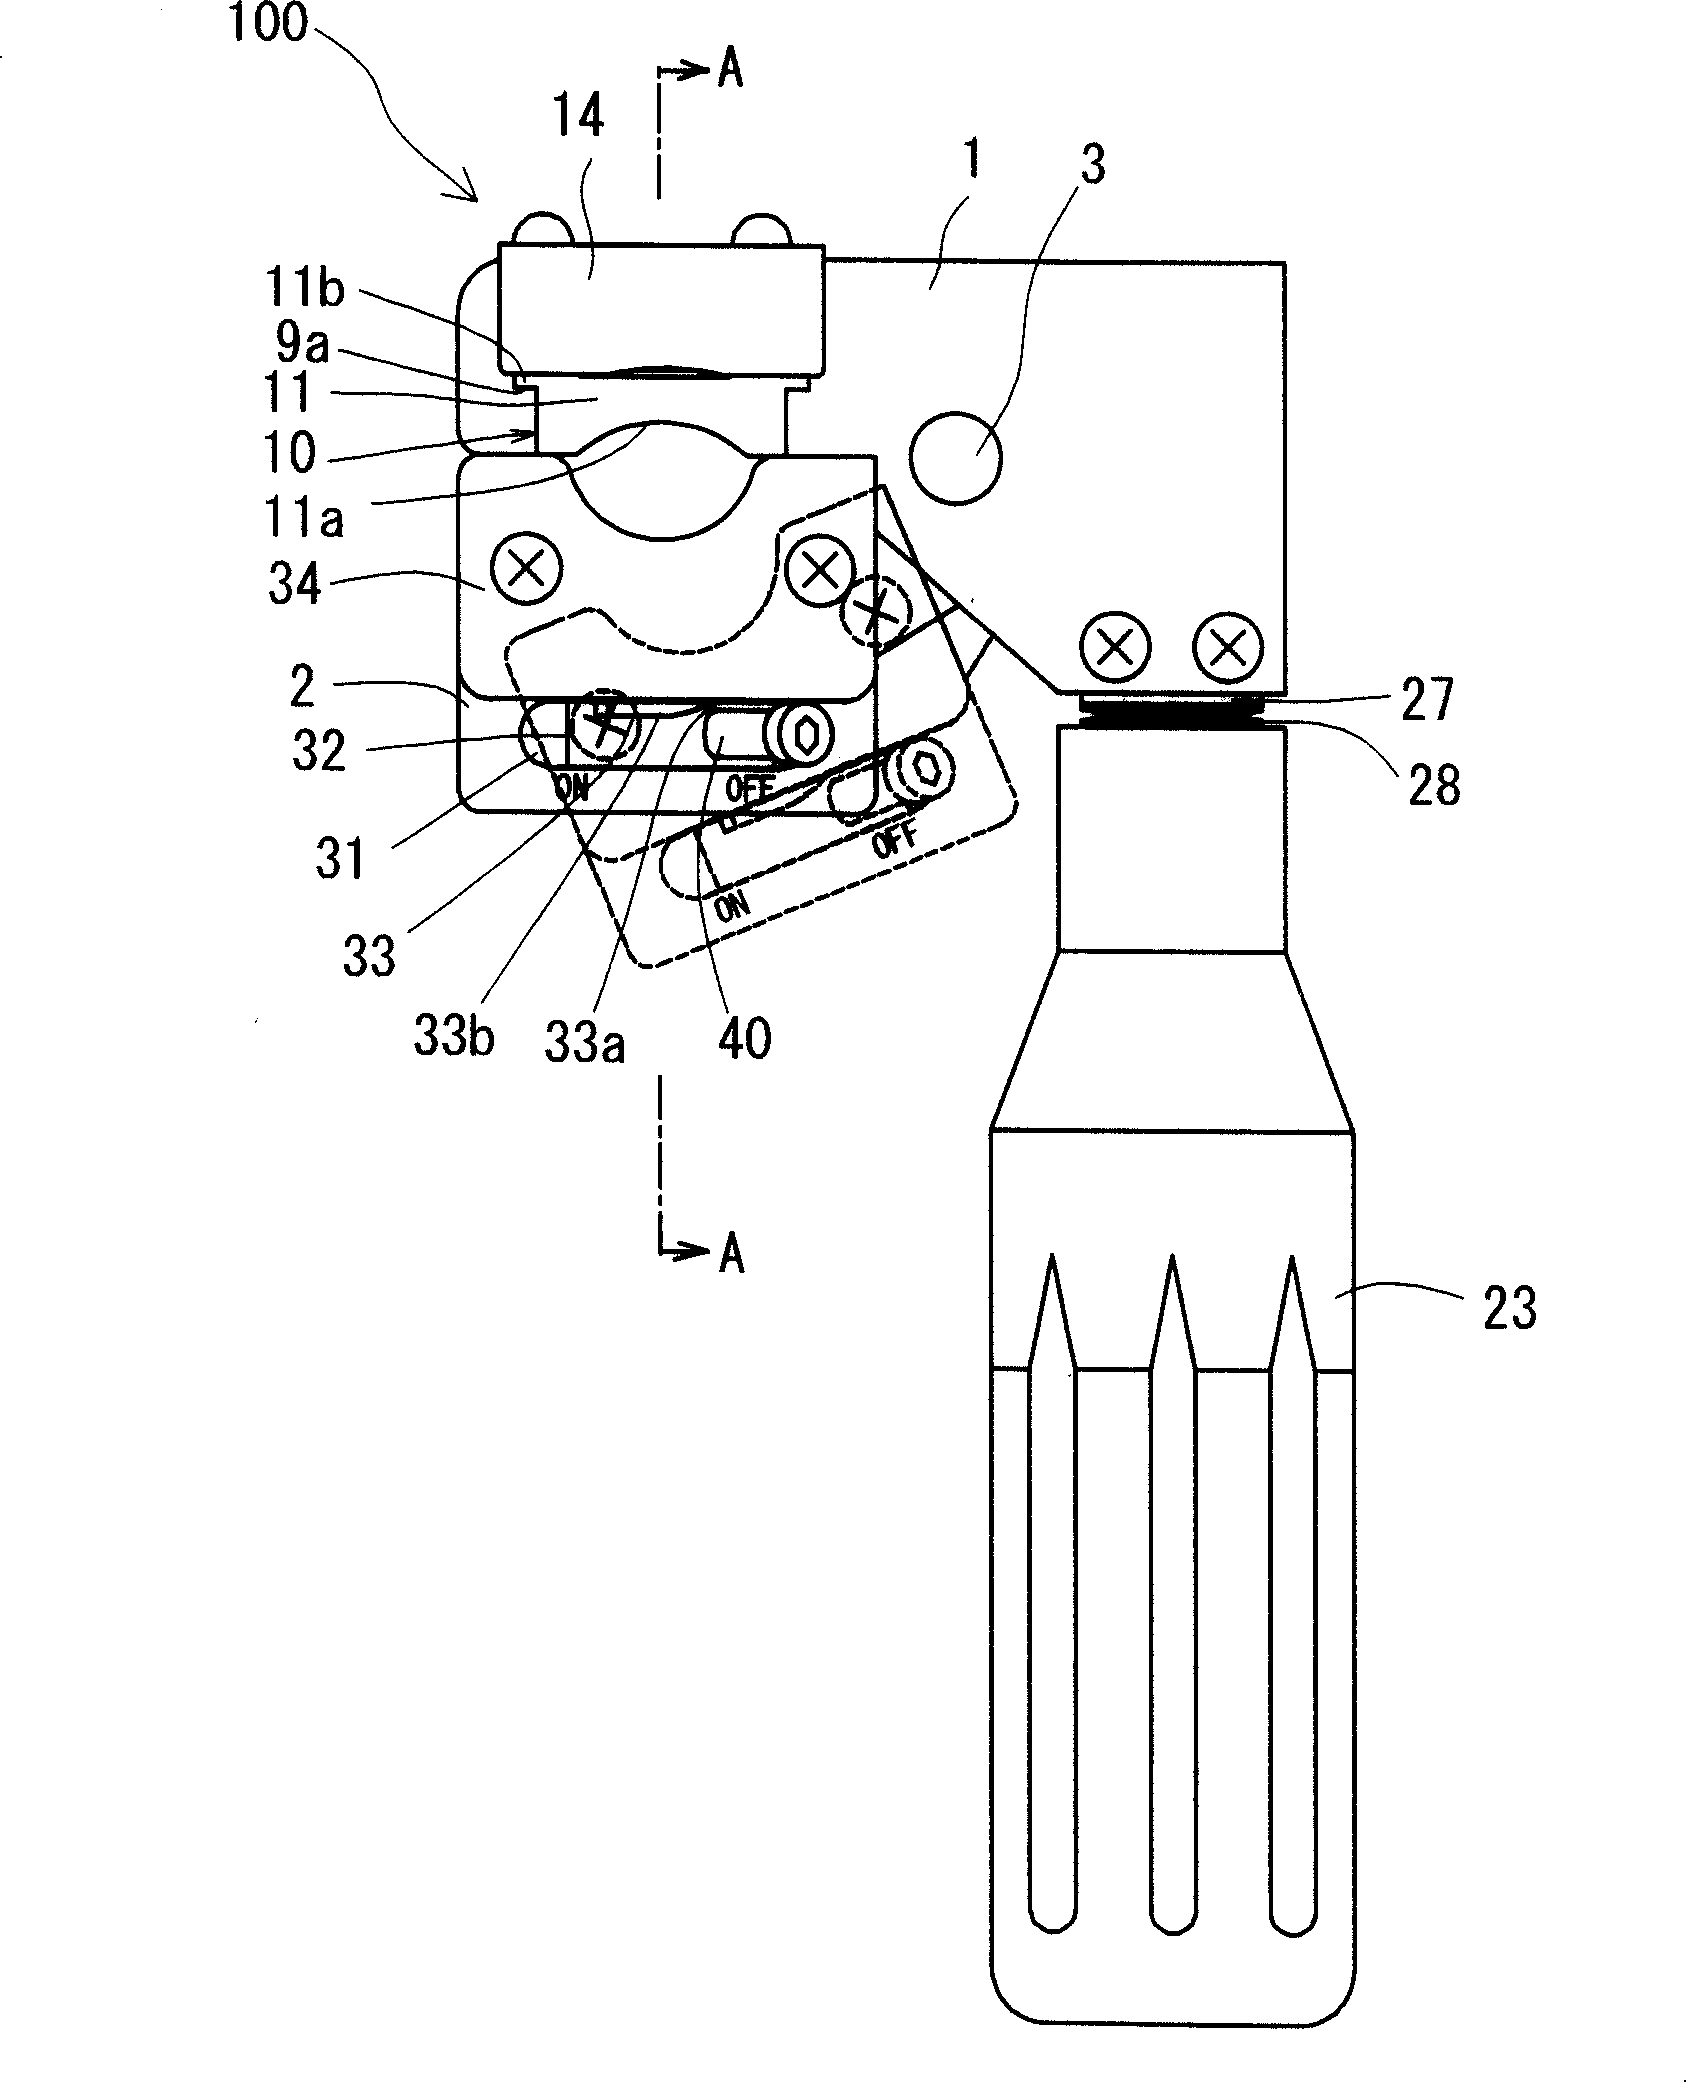 Covering stripping device for covered electric cable